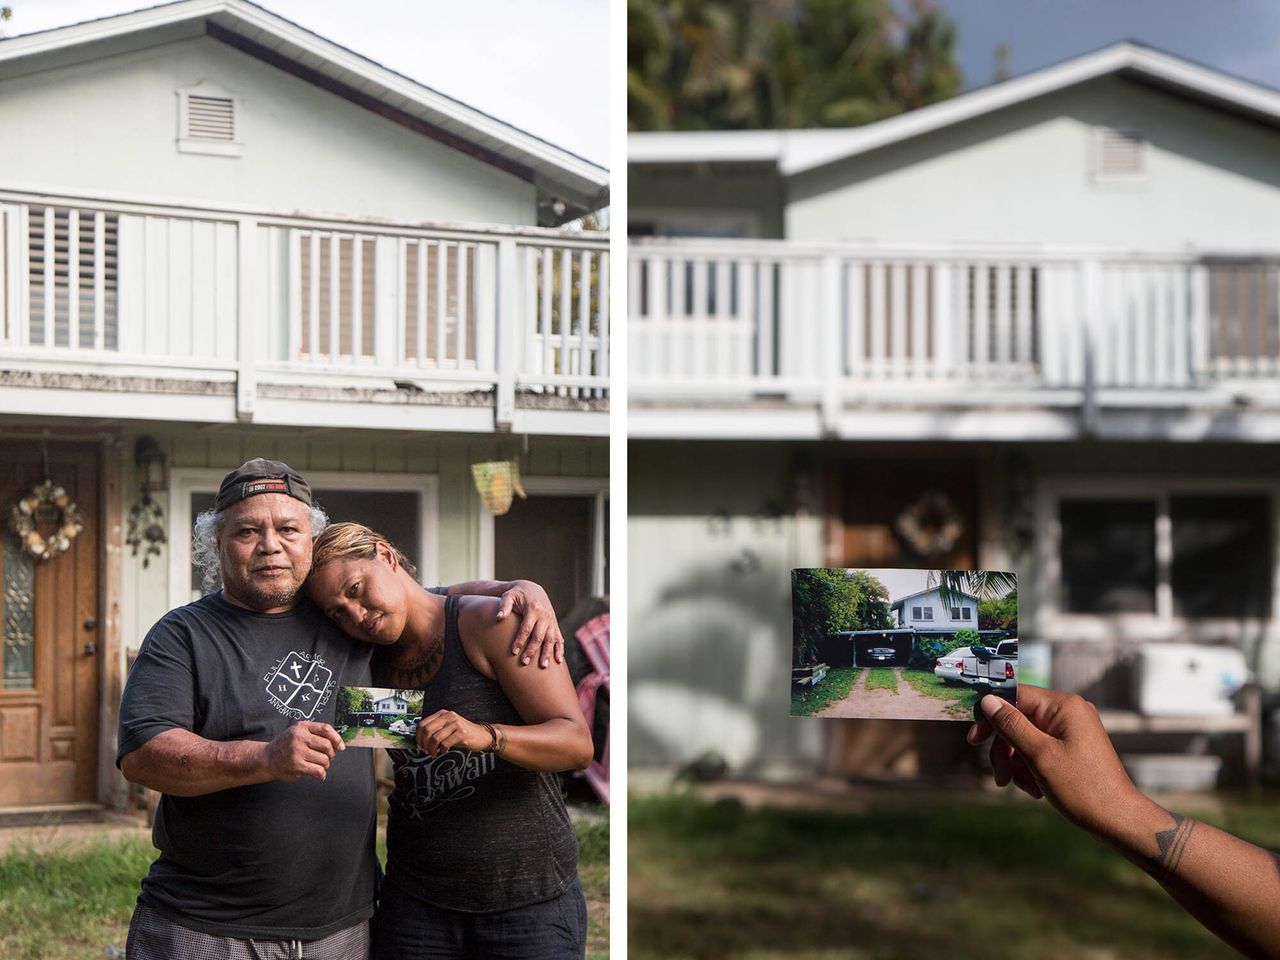 Left: Steven Oiph poses for a portrait with his youngest daughter, Kaʻiulani Manuwai, in the yard of their Kailua home. Right: Kaʻiulani Manuwai holds up an old photograph of what their home looked like prior to renovation.